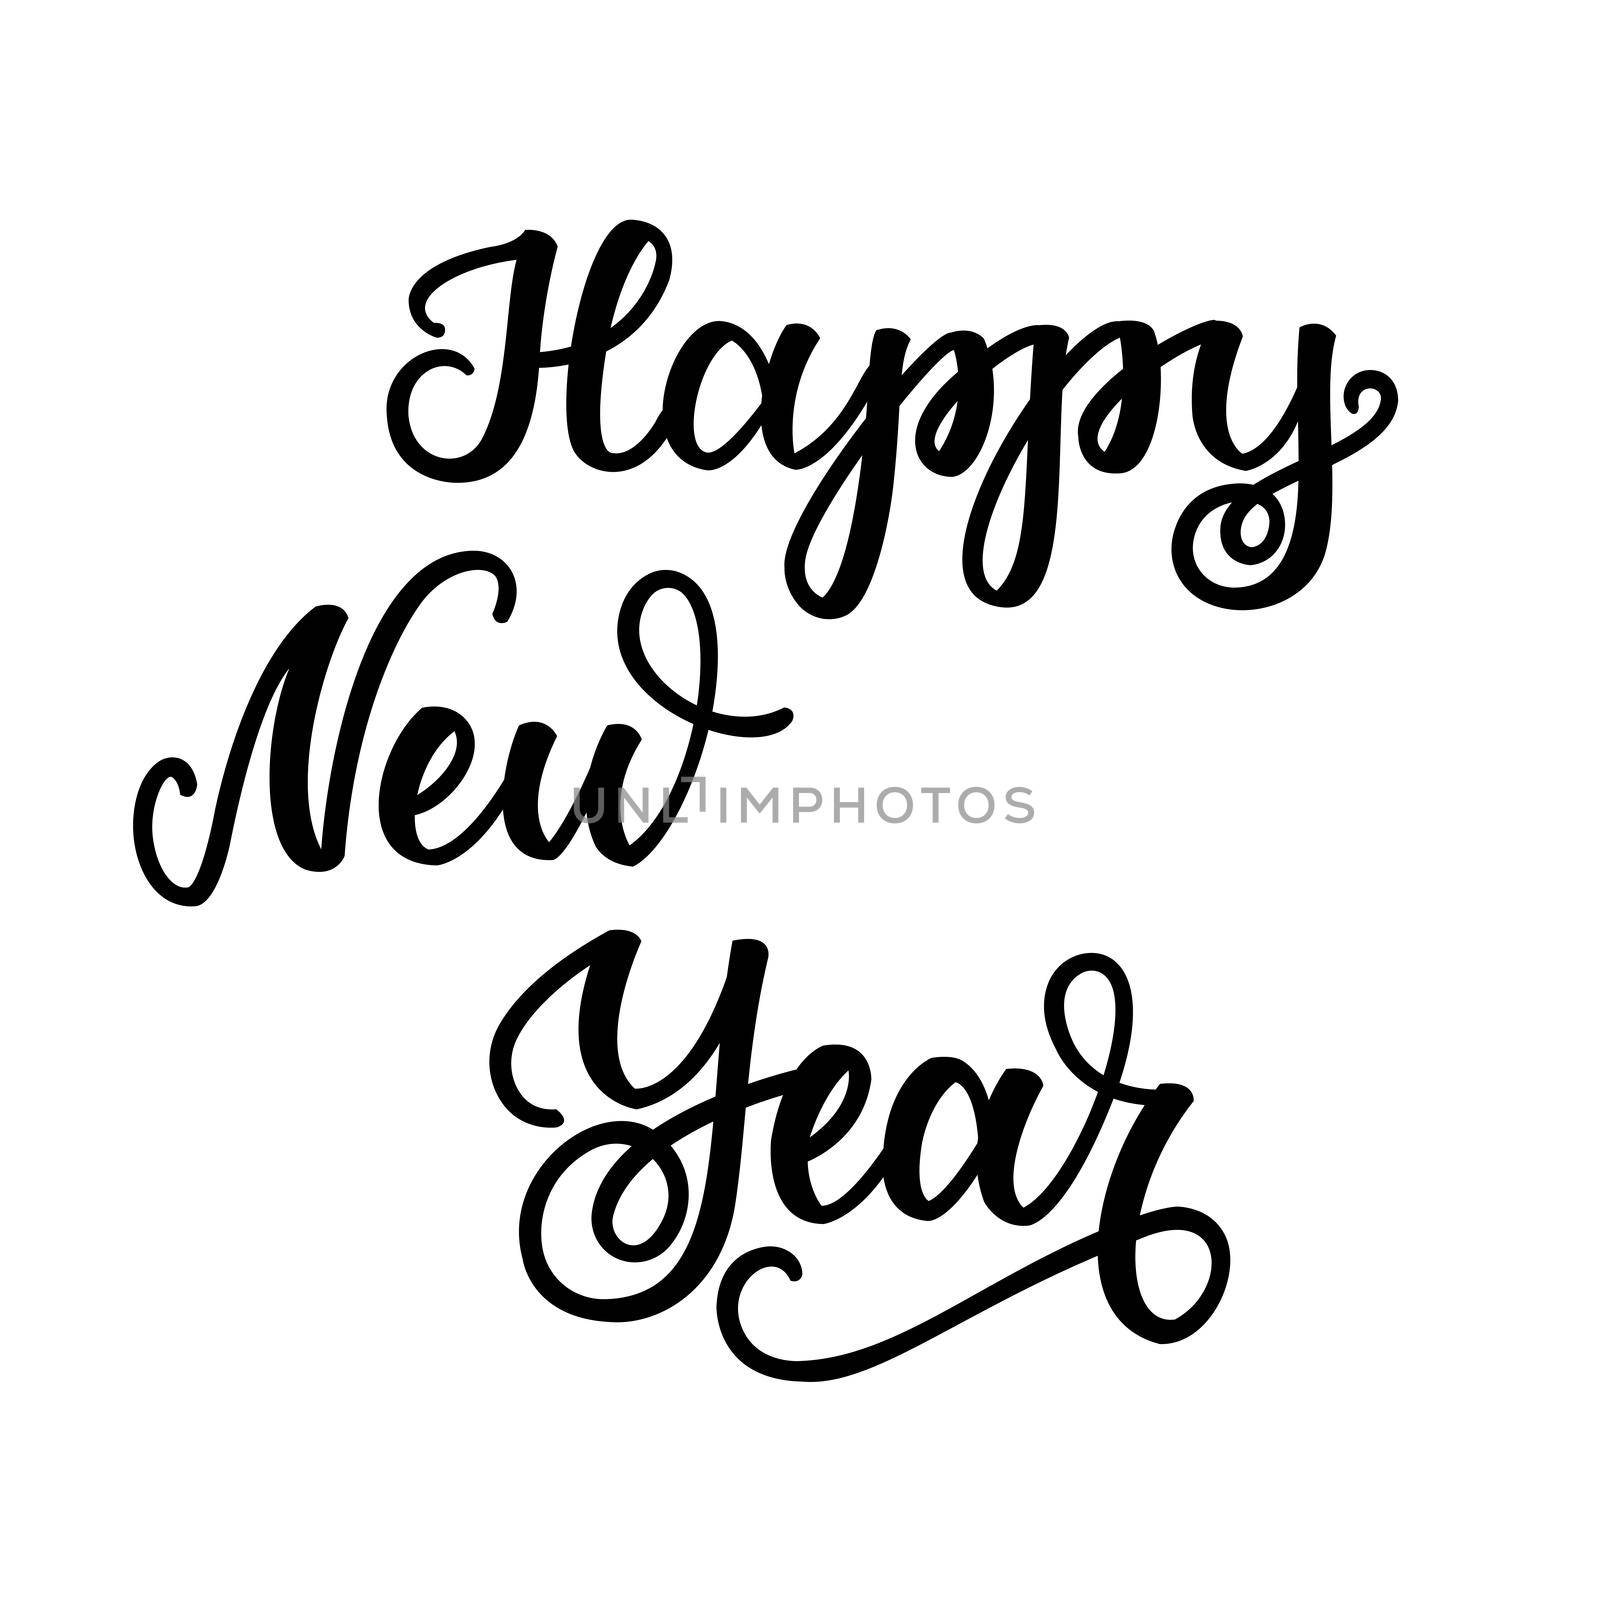 Happy New Year. Handwritten lettering isolated on white background. illustration for greeting cards, posters, web banners and much more.